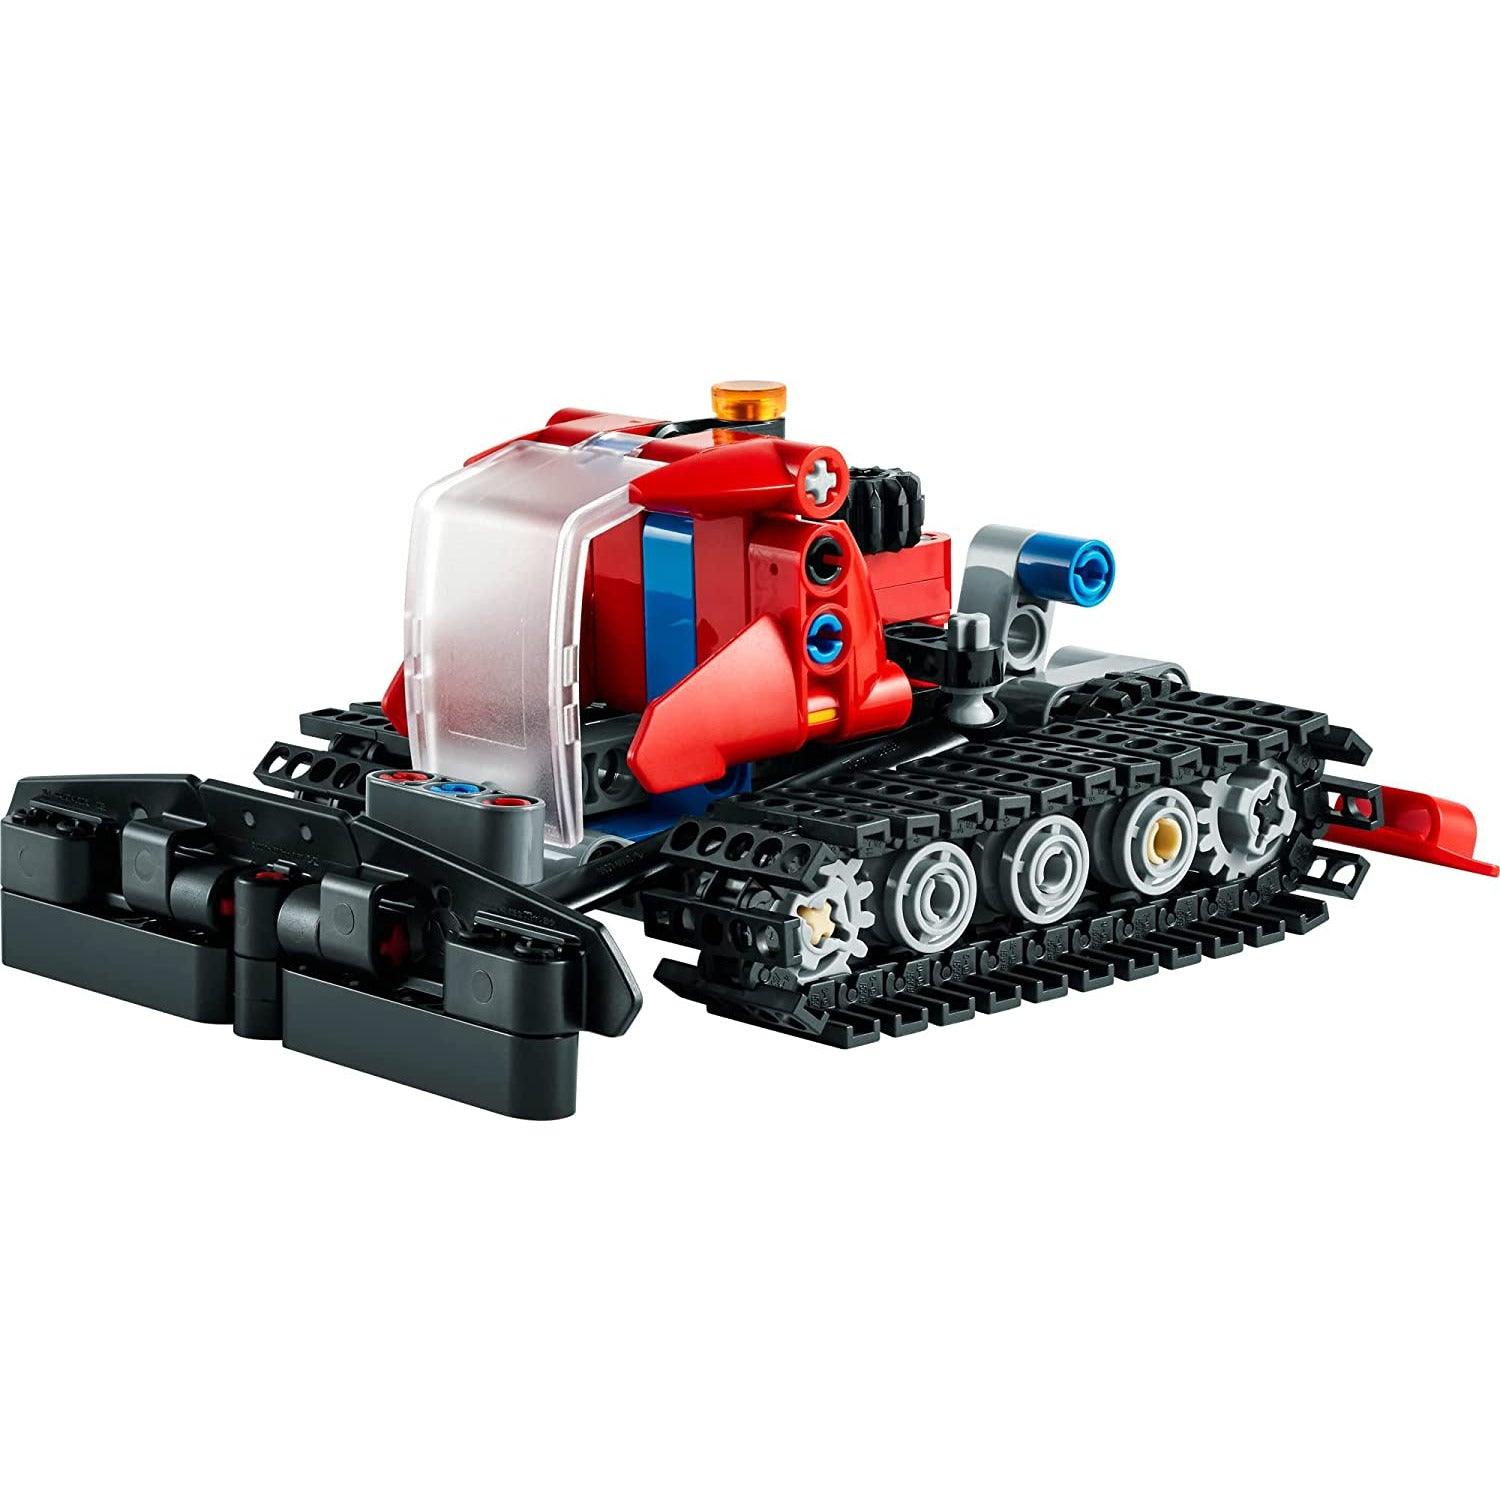 LEGO 42148 Technic Snow Groomer to Snowmobile, 2in1 Vehicle Model Set (178 Pieces) - BumbleToys - 18+, 5-7 Years, Boys, Clearance, LEGO, OXE, Pre-Order, Technic